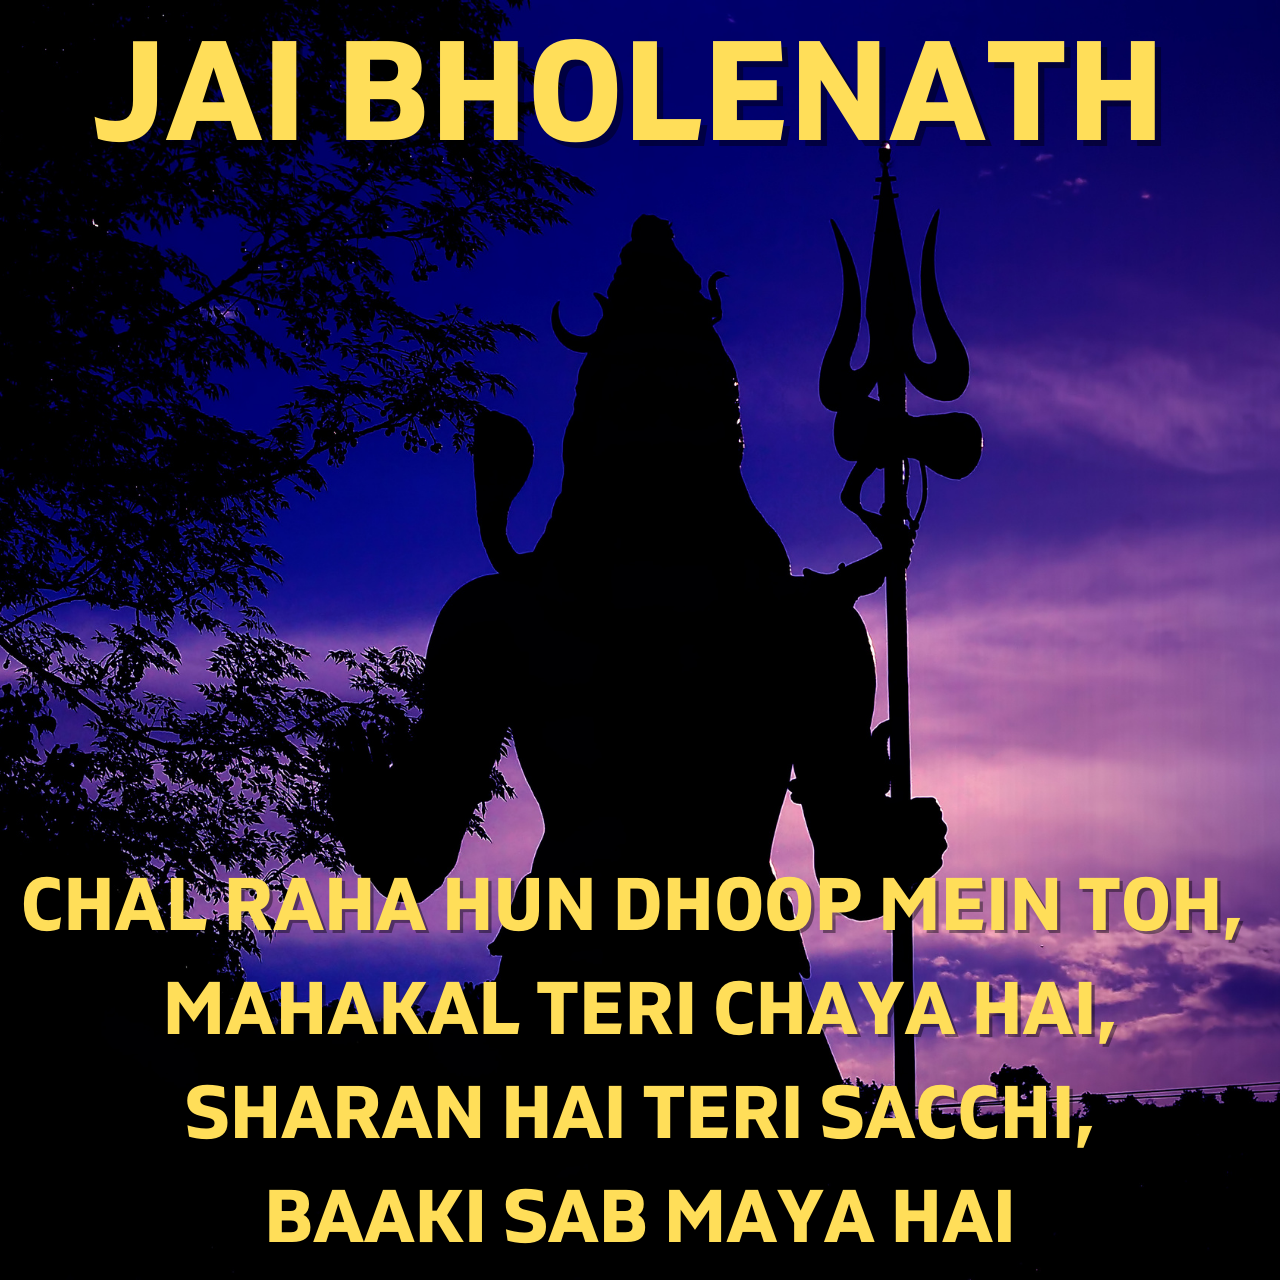 50+ Best Lord Shiva Quotes, HD Images, Status, and Shiv Ji DP for FB,  WhatsApp,